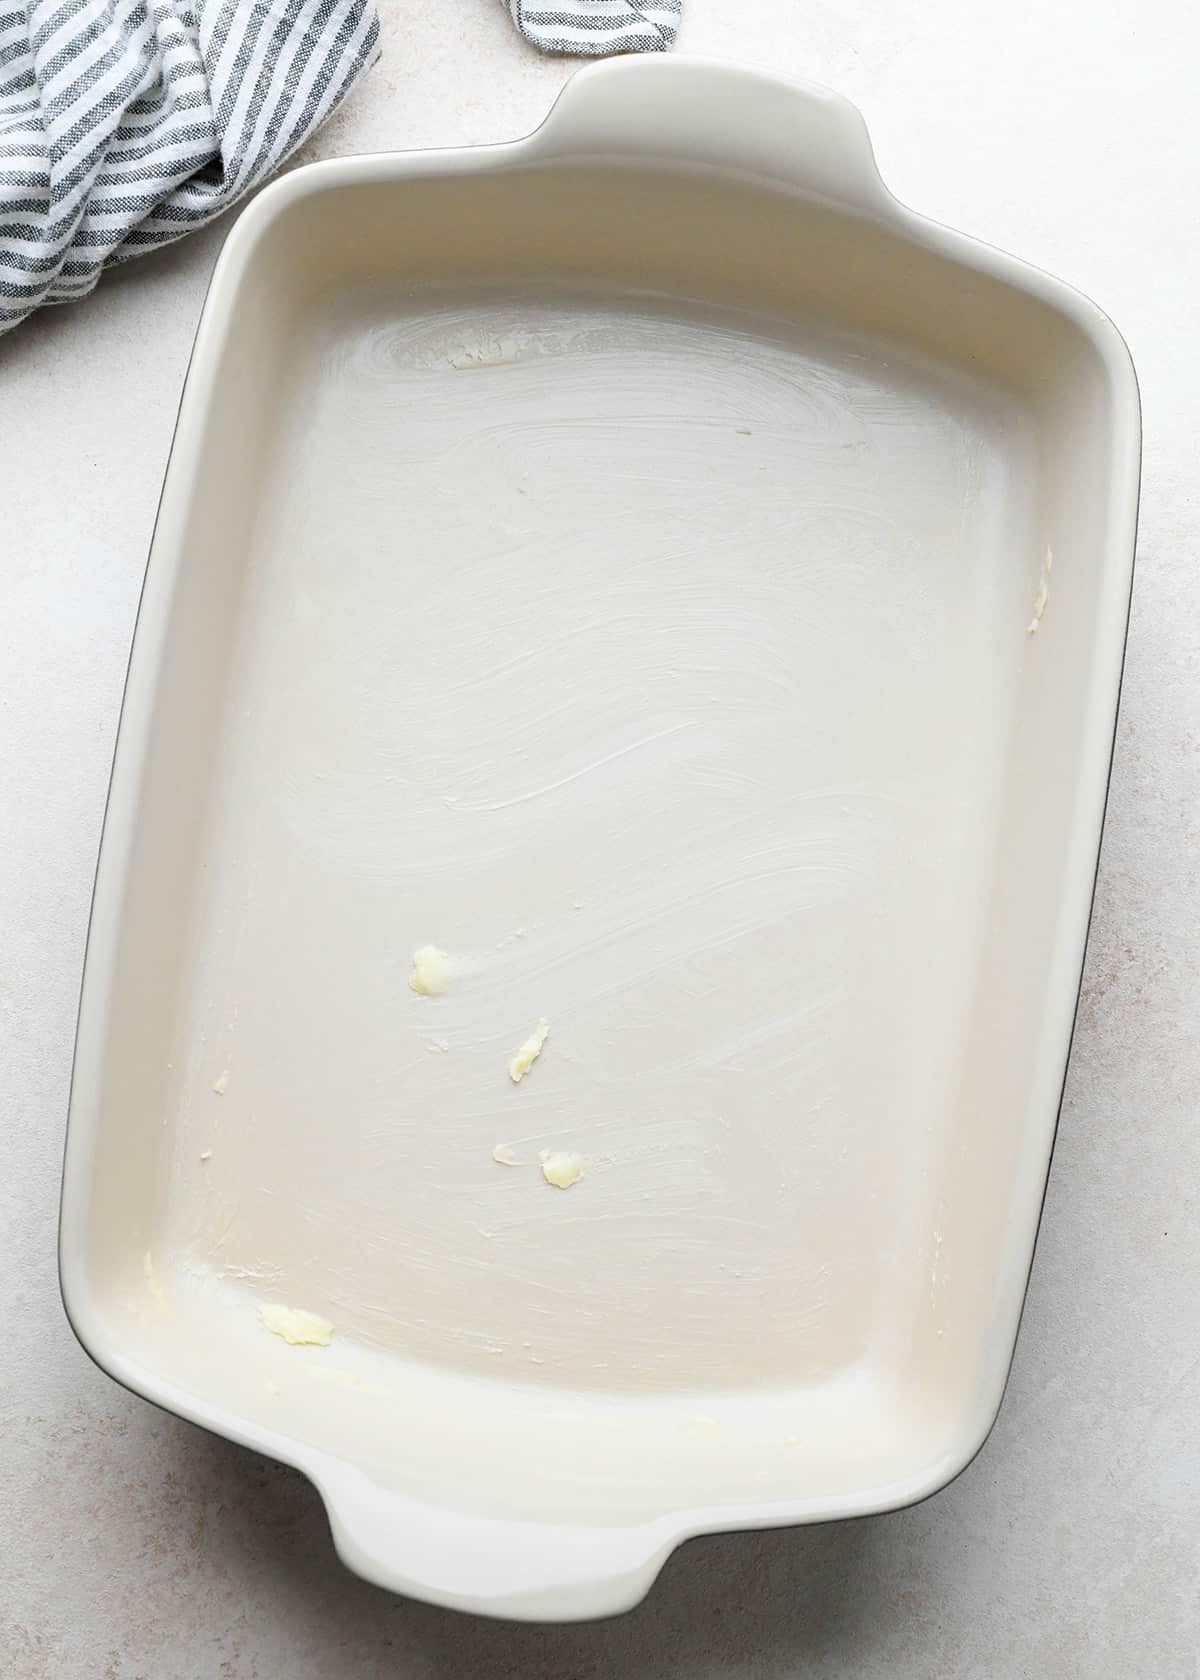 a 9x13" baking dish greased with butter